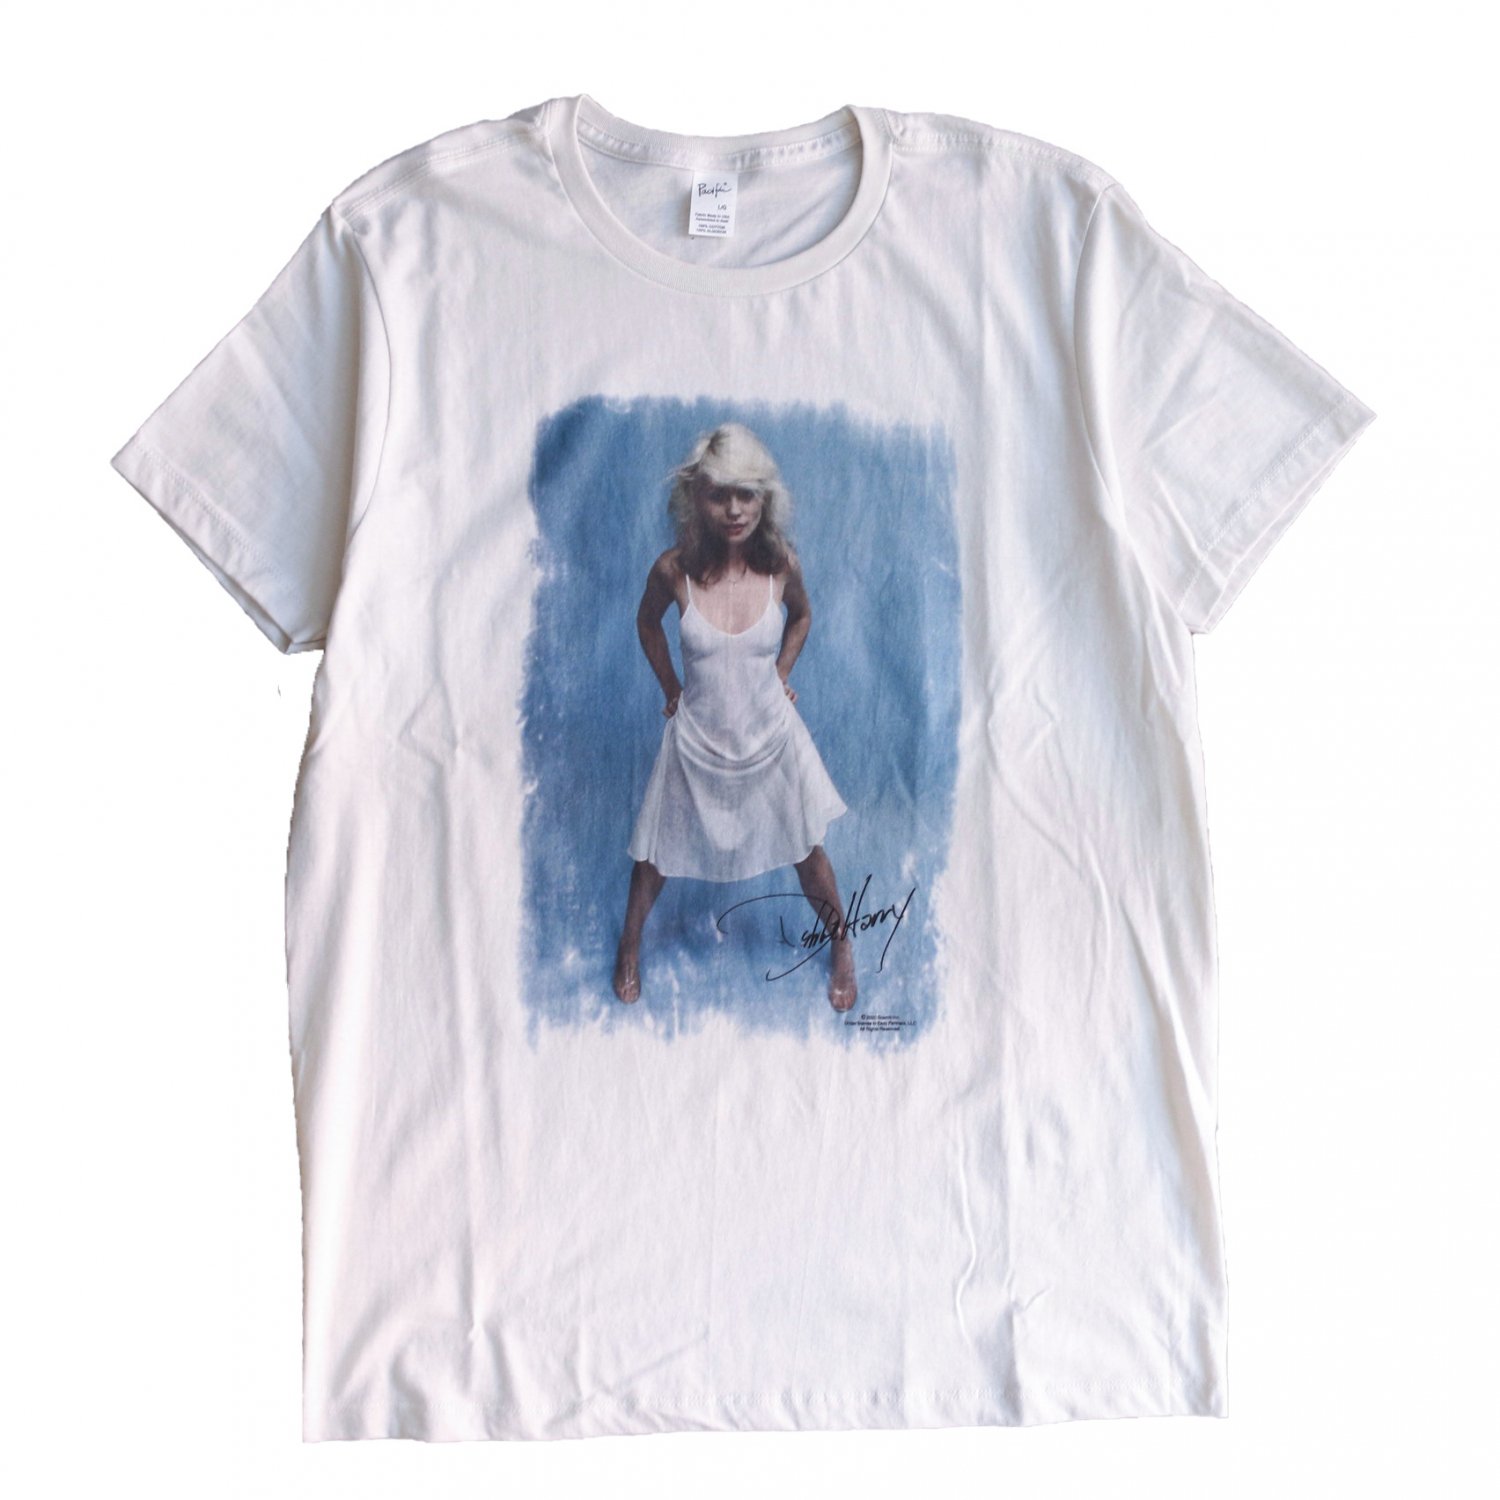 <img class='new_mark_img1' src='https://img.shop-pro.jp/img/new/icons8.gif' style='border:none;display:inline;margin:0px;padding:0px;width:auto;' />Music Tee / S/S TEE DEBBIE HARRY